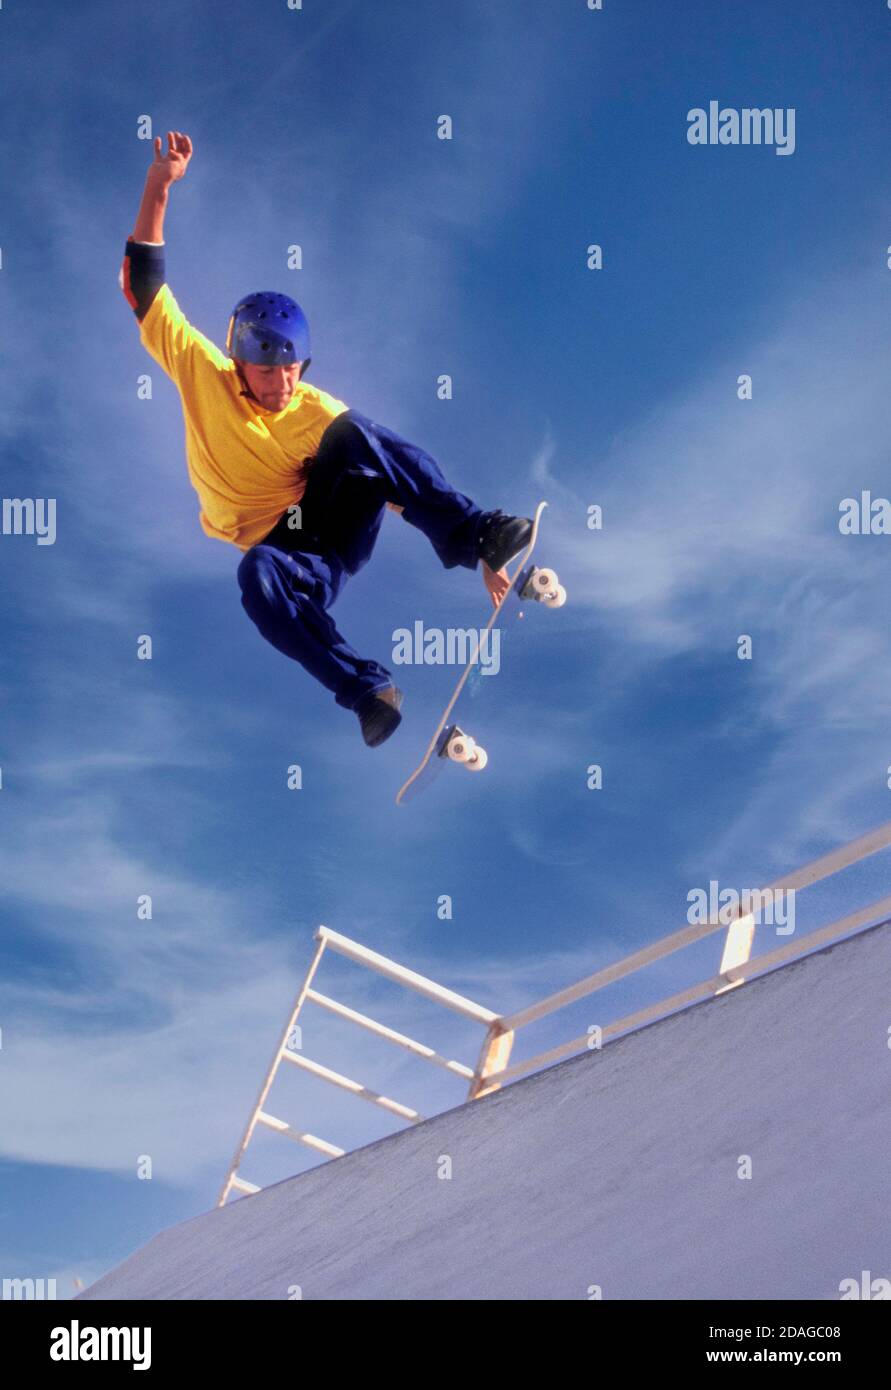 Skateboarder wearing helmet and protective armbands, captured in midair flying against a sunny blue sky Stock Photo